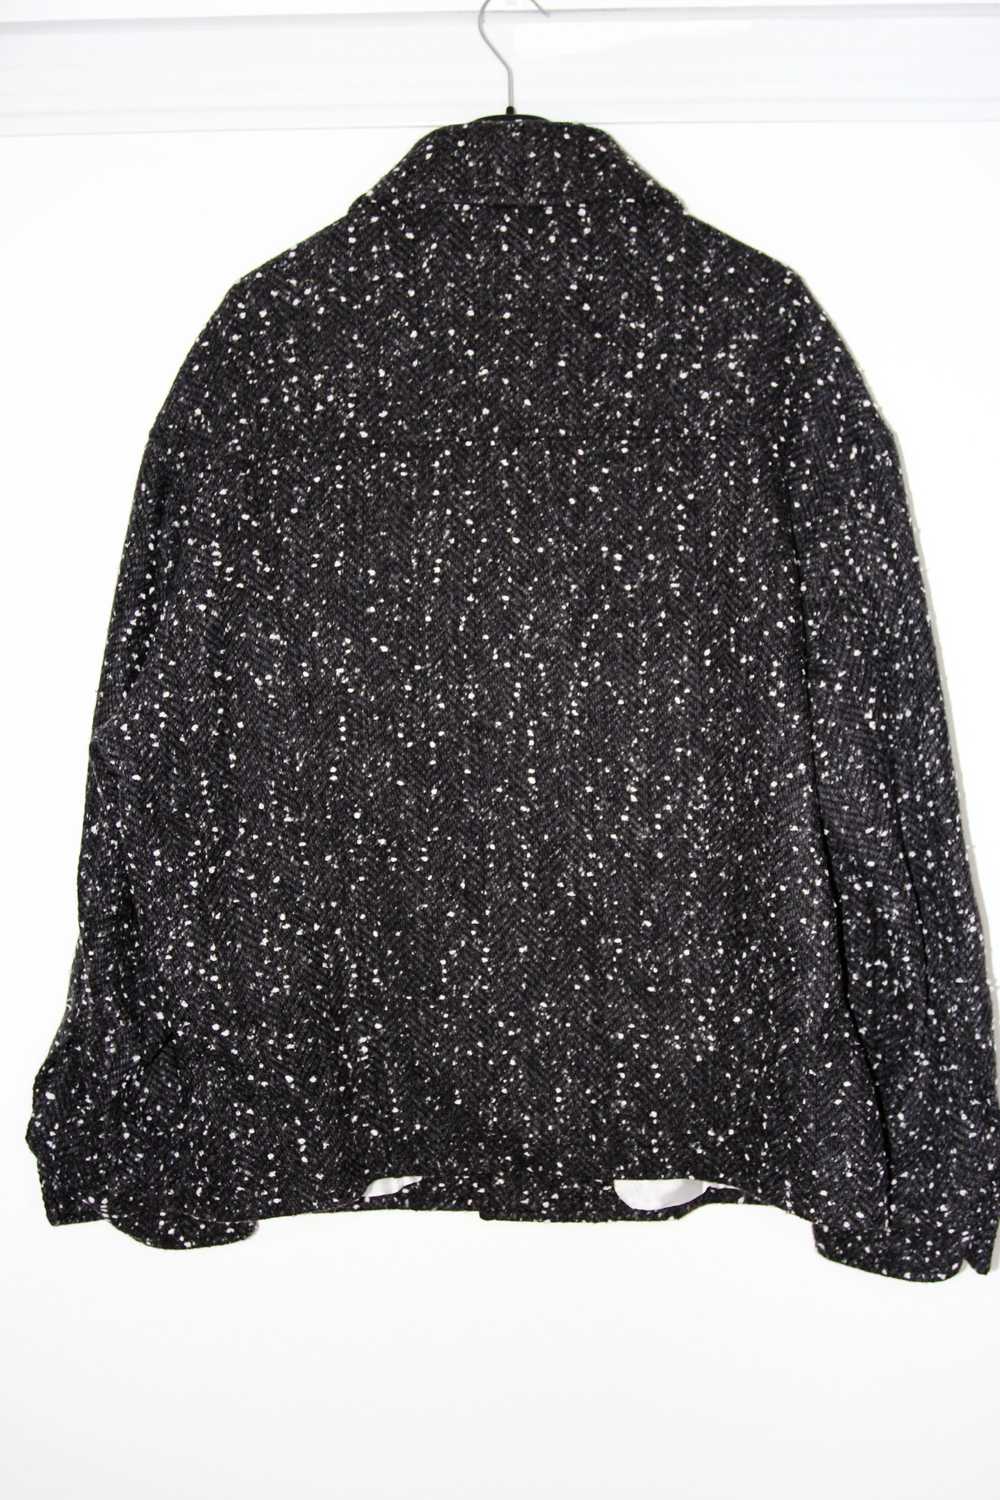 BNWT AW21 MARNI SPECKLED JACKET 46 - image 3